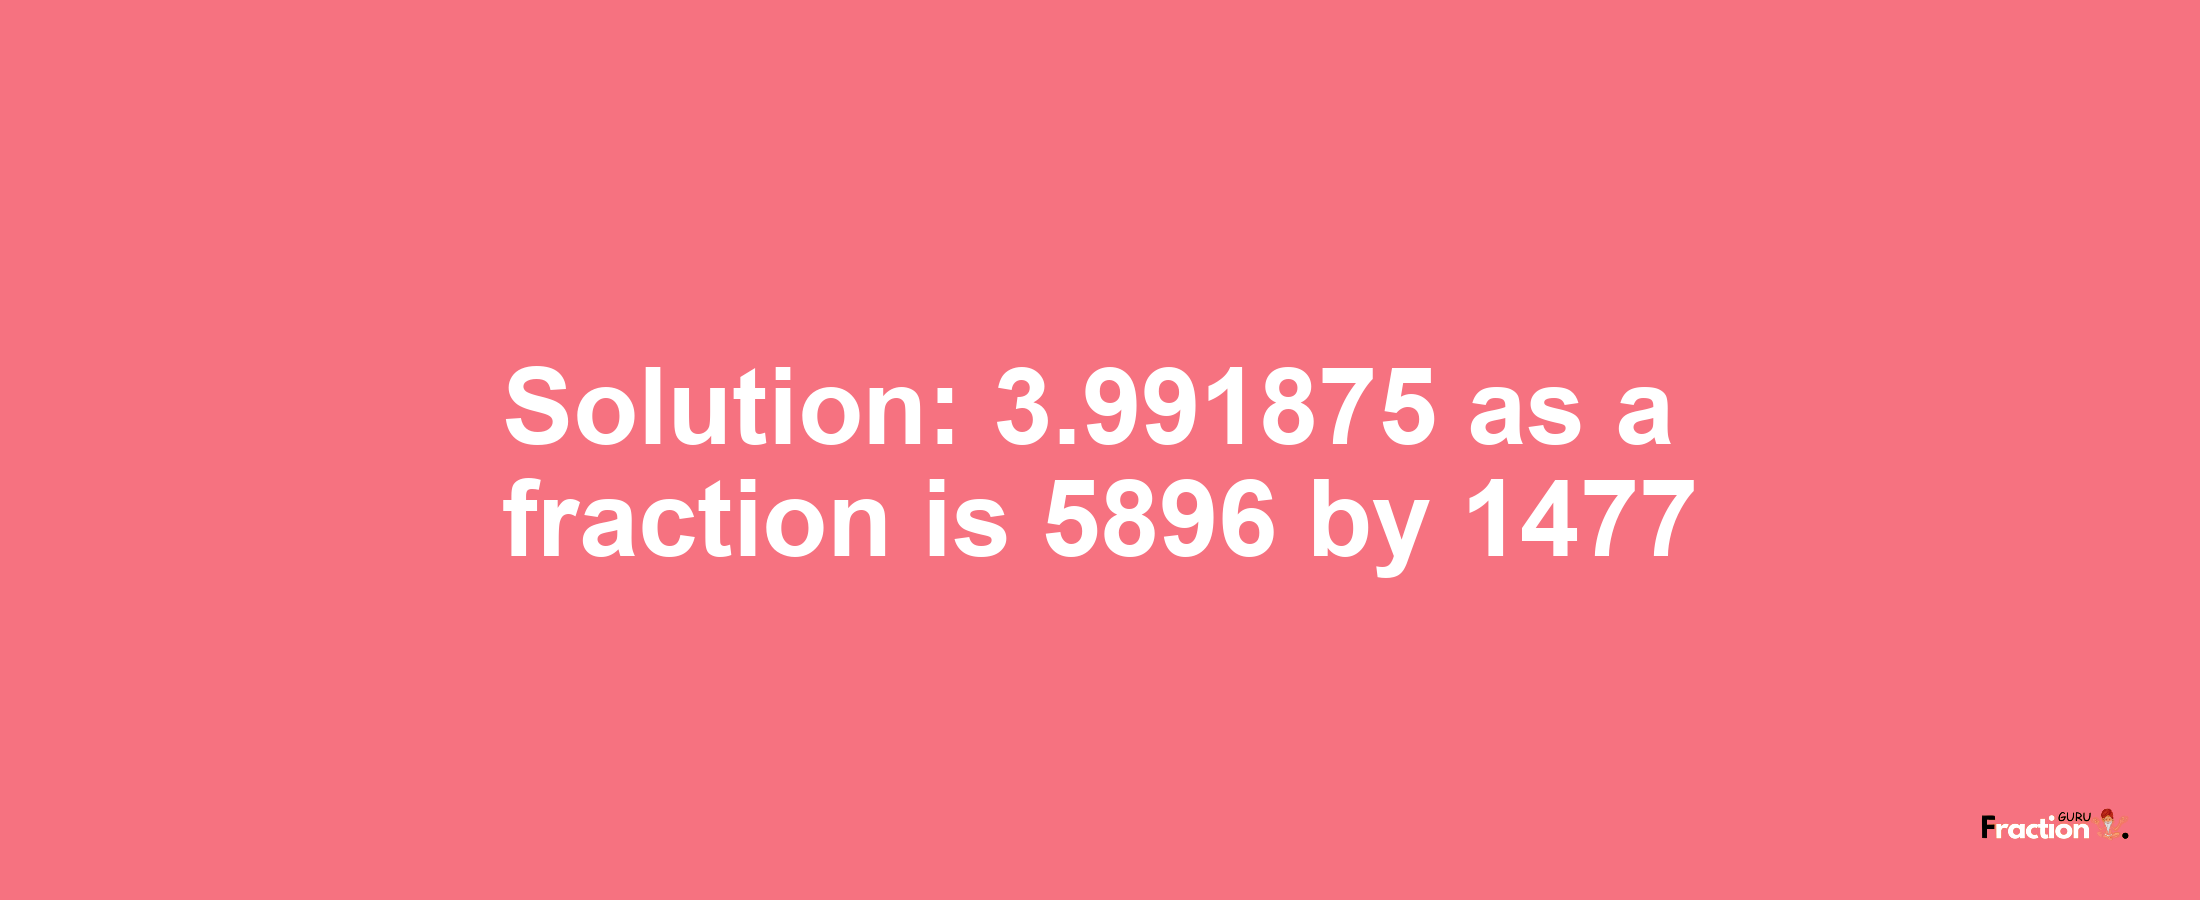 Solution:3.991875 as a fraction is 5896/1477